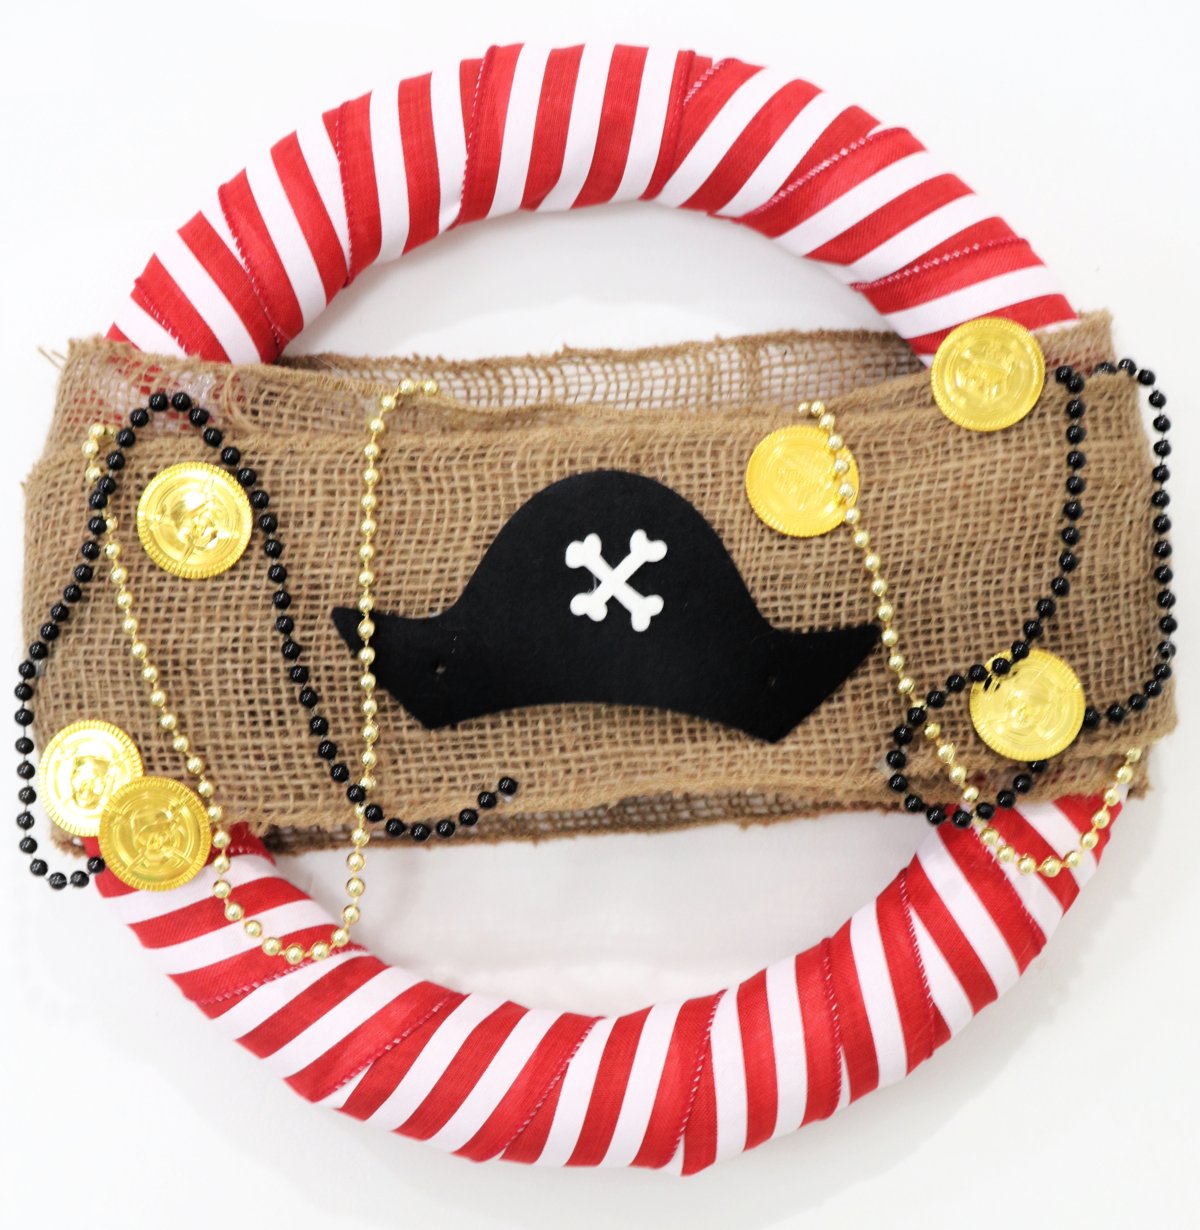 This image contains a wreath wrapped in red and white striped ribbon with burlap across the center, a pirate hat, beads, and gold coins.